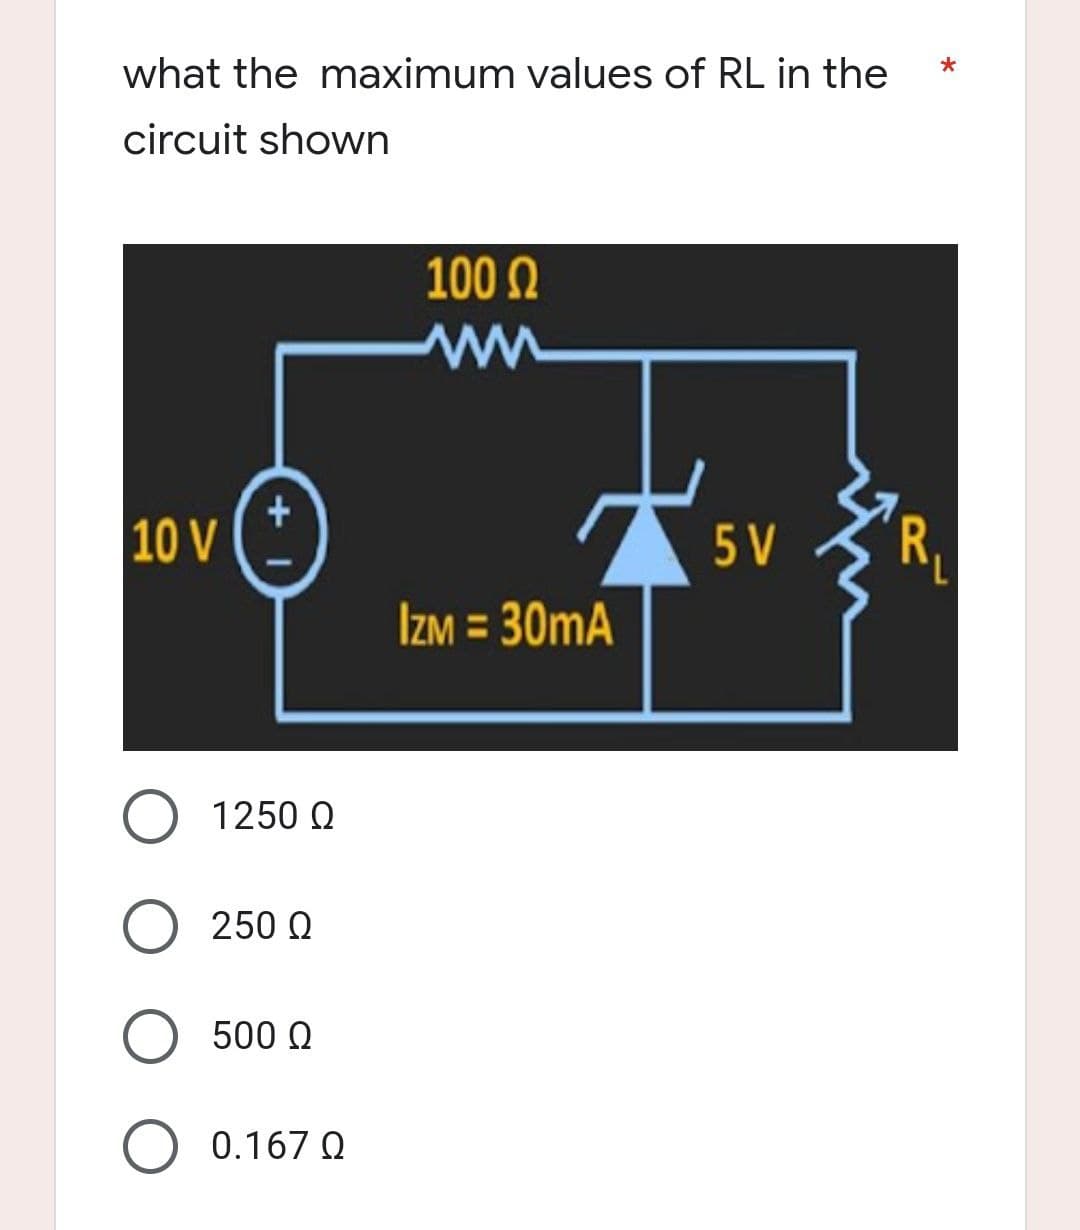 what the maximum values of RL in the
*
circuit shown
100 Ω
W
10 V
5 V
IZM = 30mA
Ο 1250 Ω
250 Ω
O 500 Q
+
0.167 Q